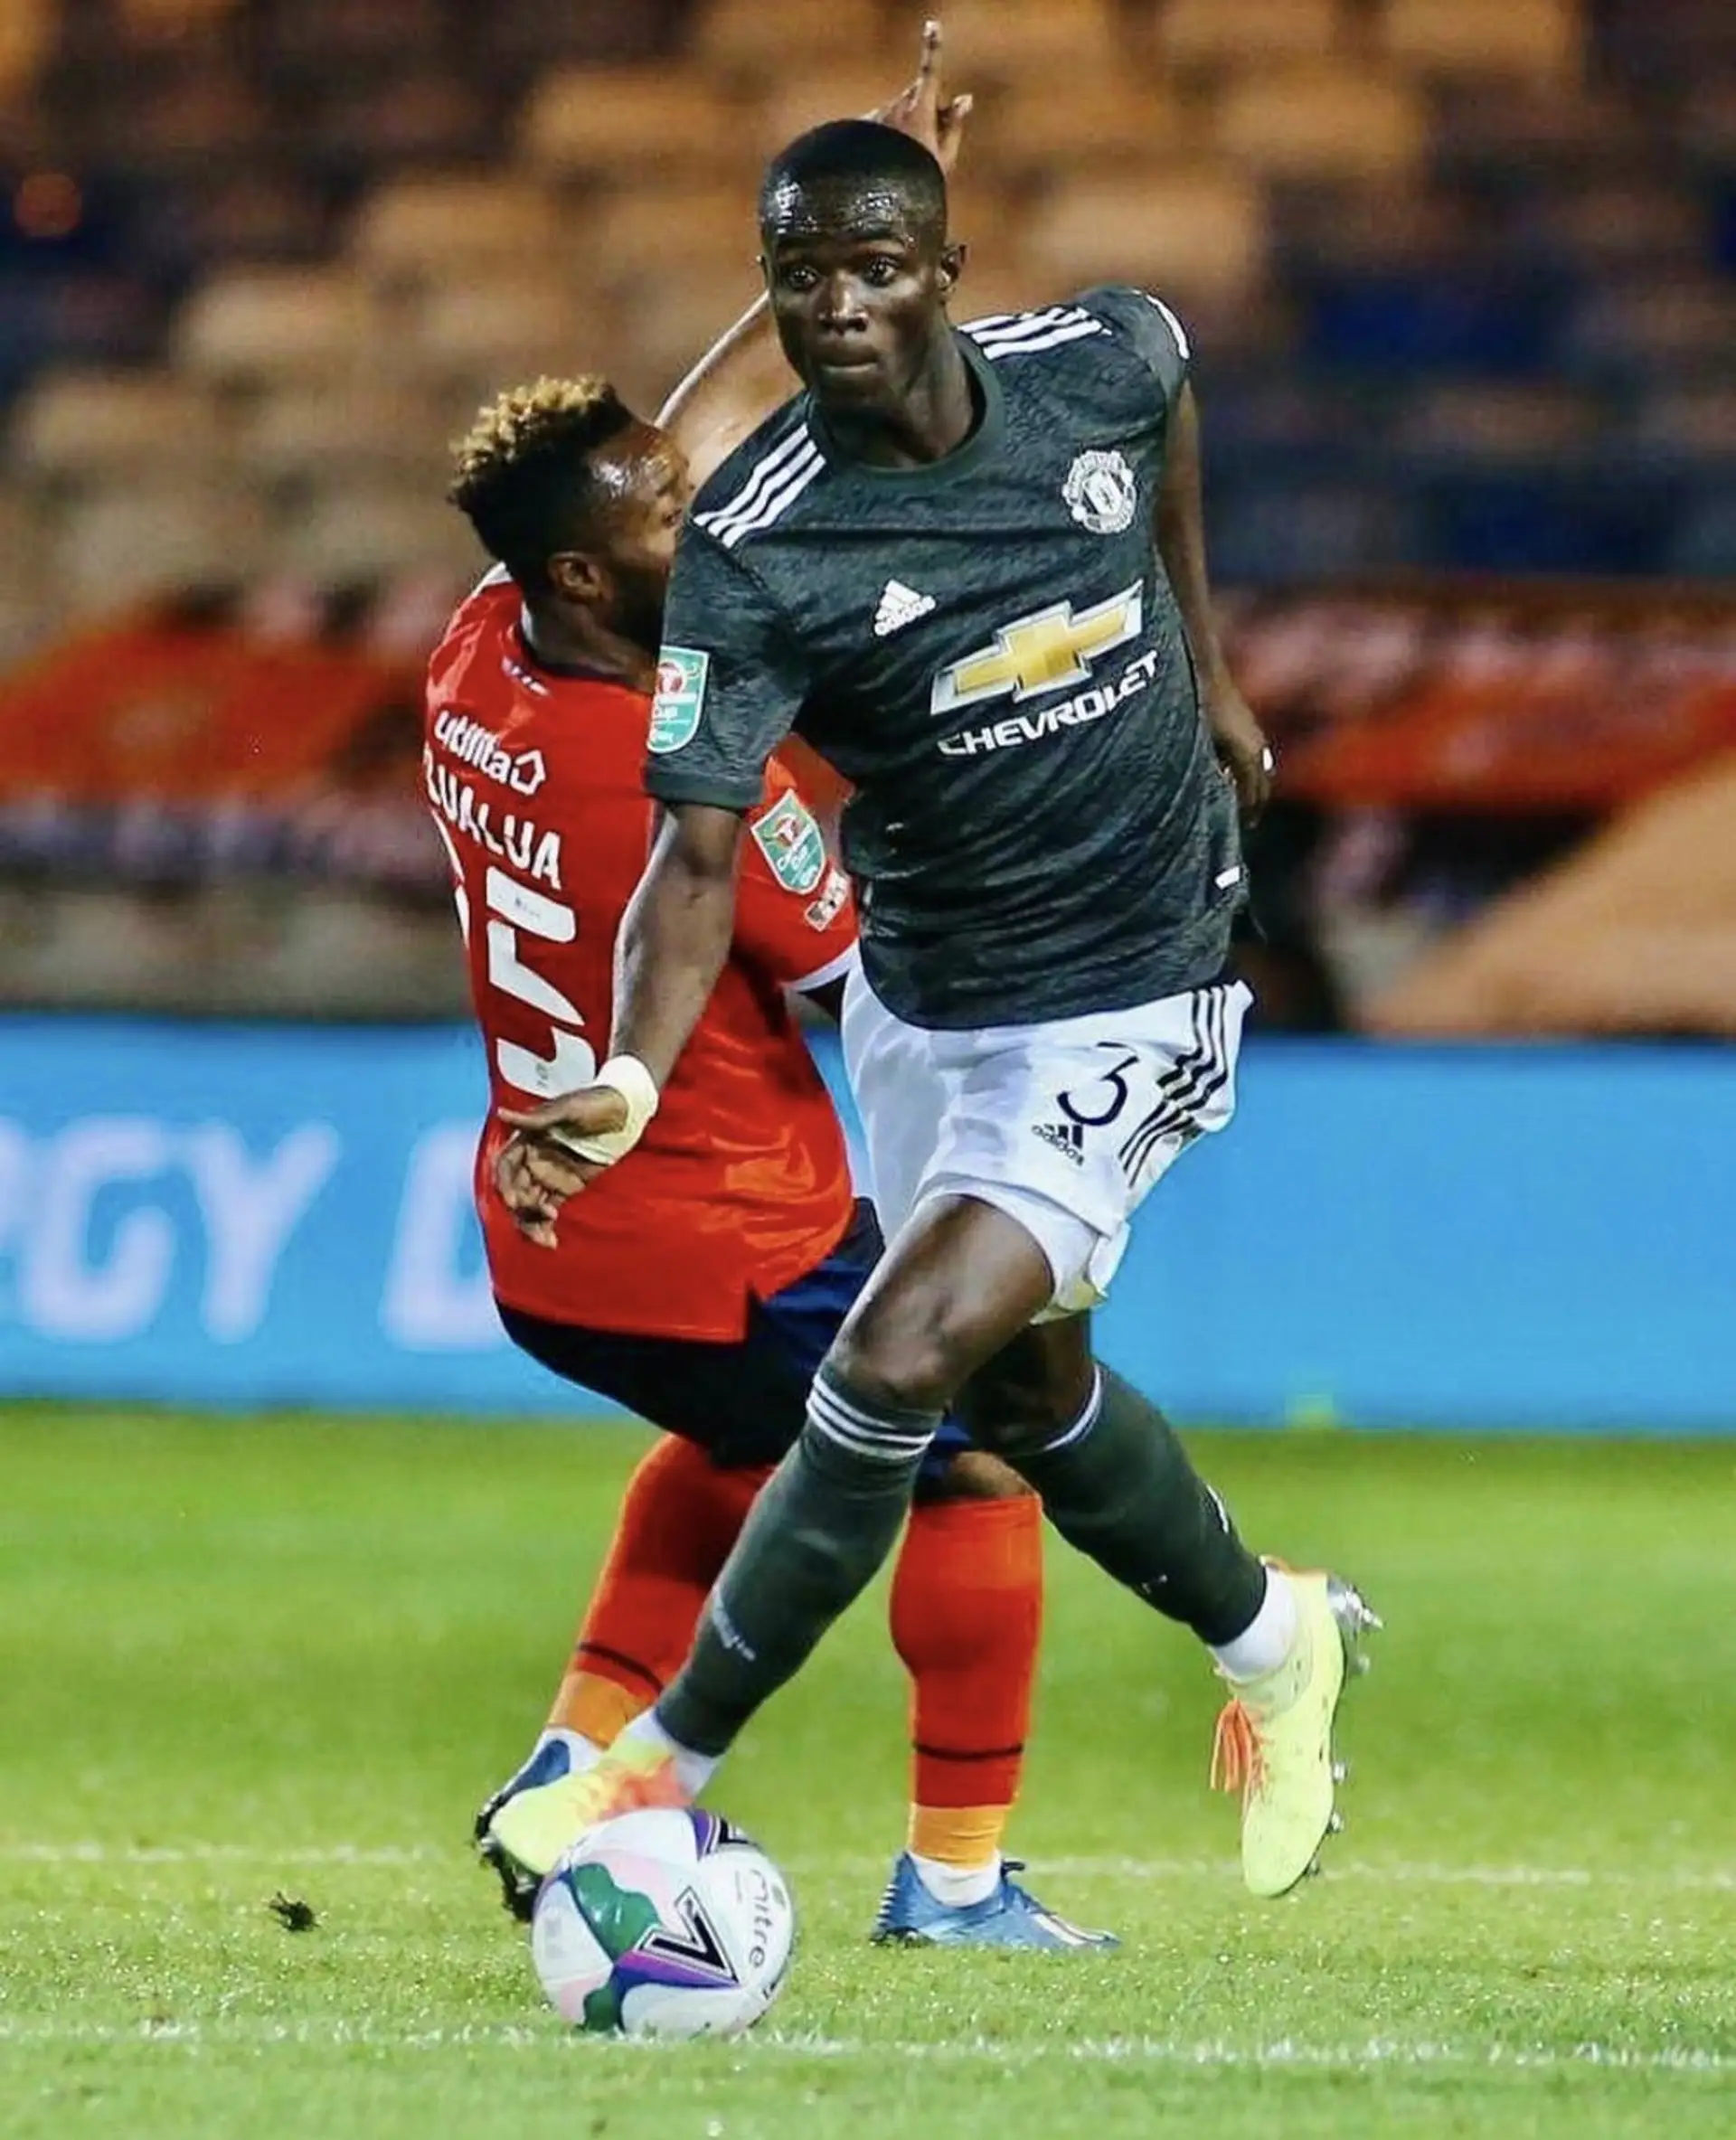 Eric Bailly Impress Against Luton Town - Should Ole Consider Pairing Maguire with Bailly Instead? 